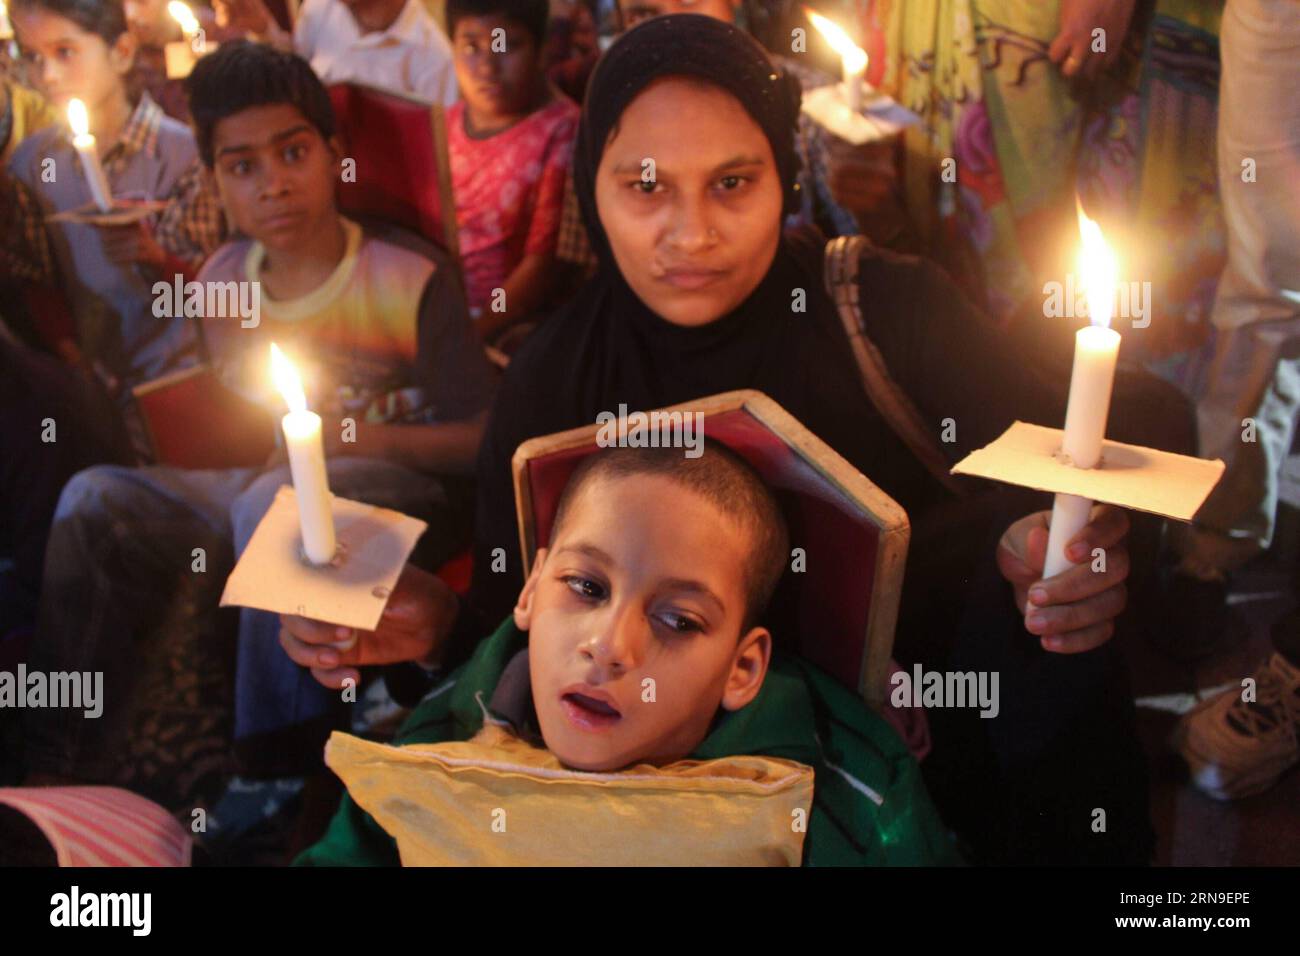 (151202) -- BHOPAL, Dec. 1, 2015 () -- People light candles during a vigil marking the 31st anniversary of the gas tragedy in Bhopal, India, Dec. 1, 2015. More than 15,000 residents were killed by the gas leakage from the Union Carbide pesticide plant on the night of Dec. 1 to 3, 1984 in Bhopal, considered the world s worst industrial disaster. (/Stringer) INDIA-BHOPAL-BHOPAL DISASTER-CONDOLENCE Xinhua PUBLICATIONxNOTxINxCHN   151202 Bhopal DEC 1 2015 Celebrities Light Candles during a Vigil marking The 31st Anniversary of The Gas Tragedy in Bhopal India DEC 1 2015 More than 15 000 Residents W Stock Photo